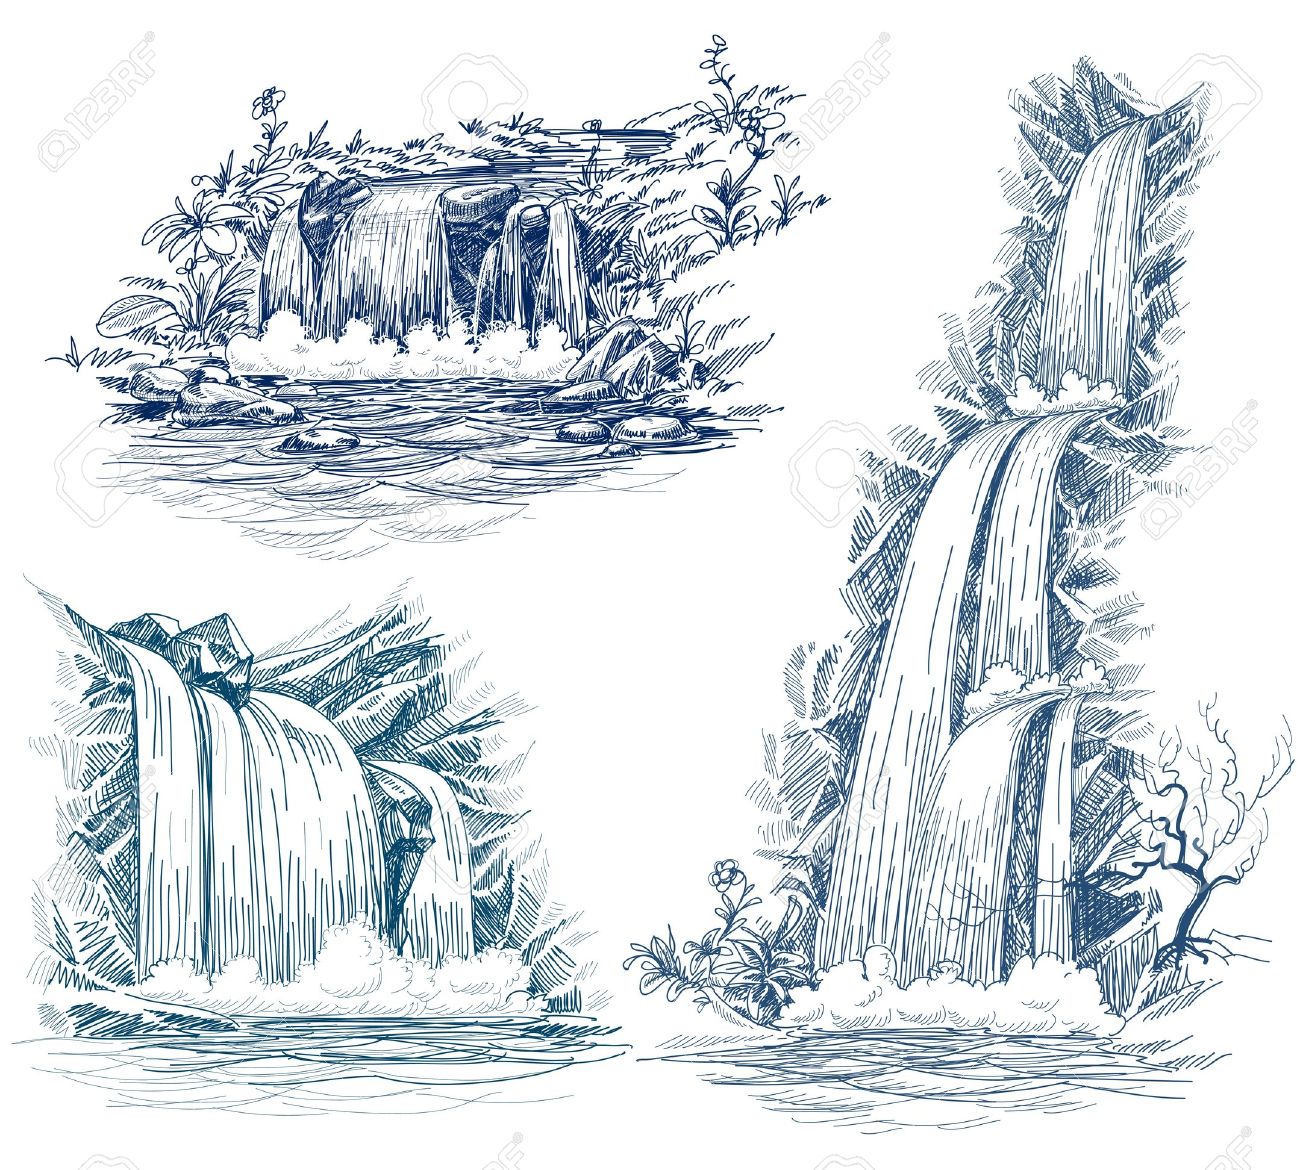 Water falls silhouette clipart.